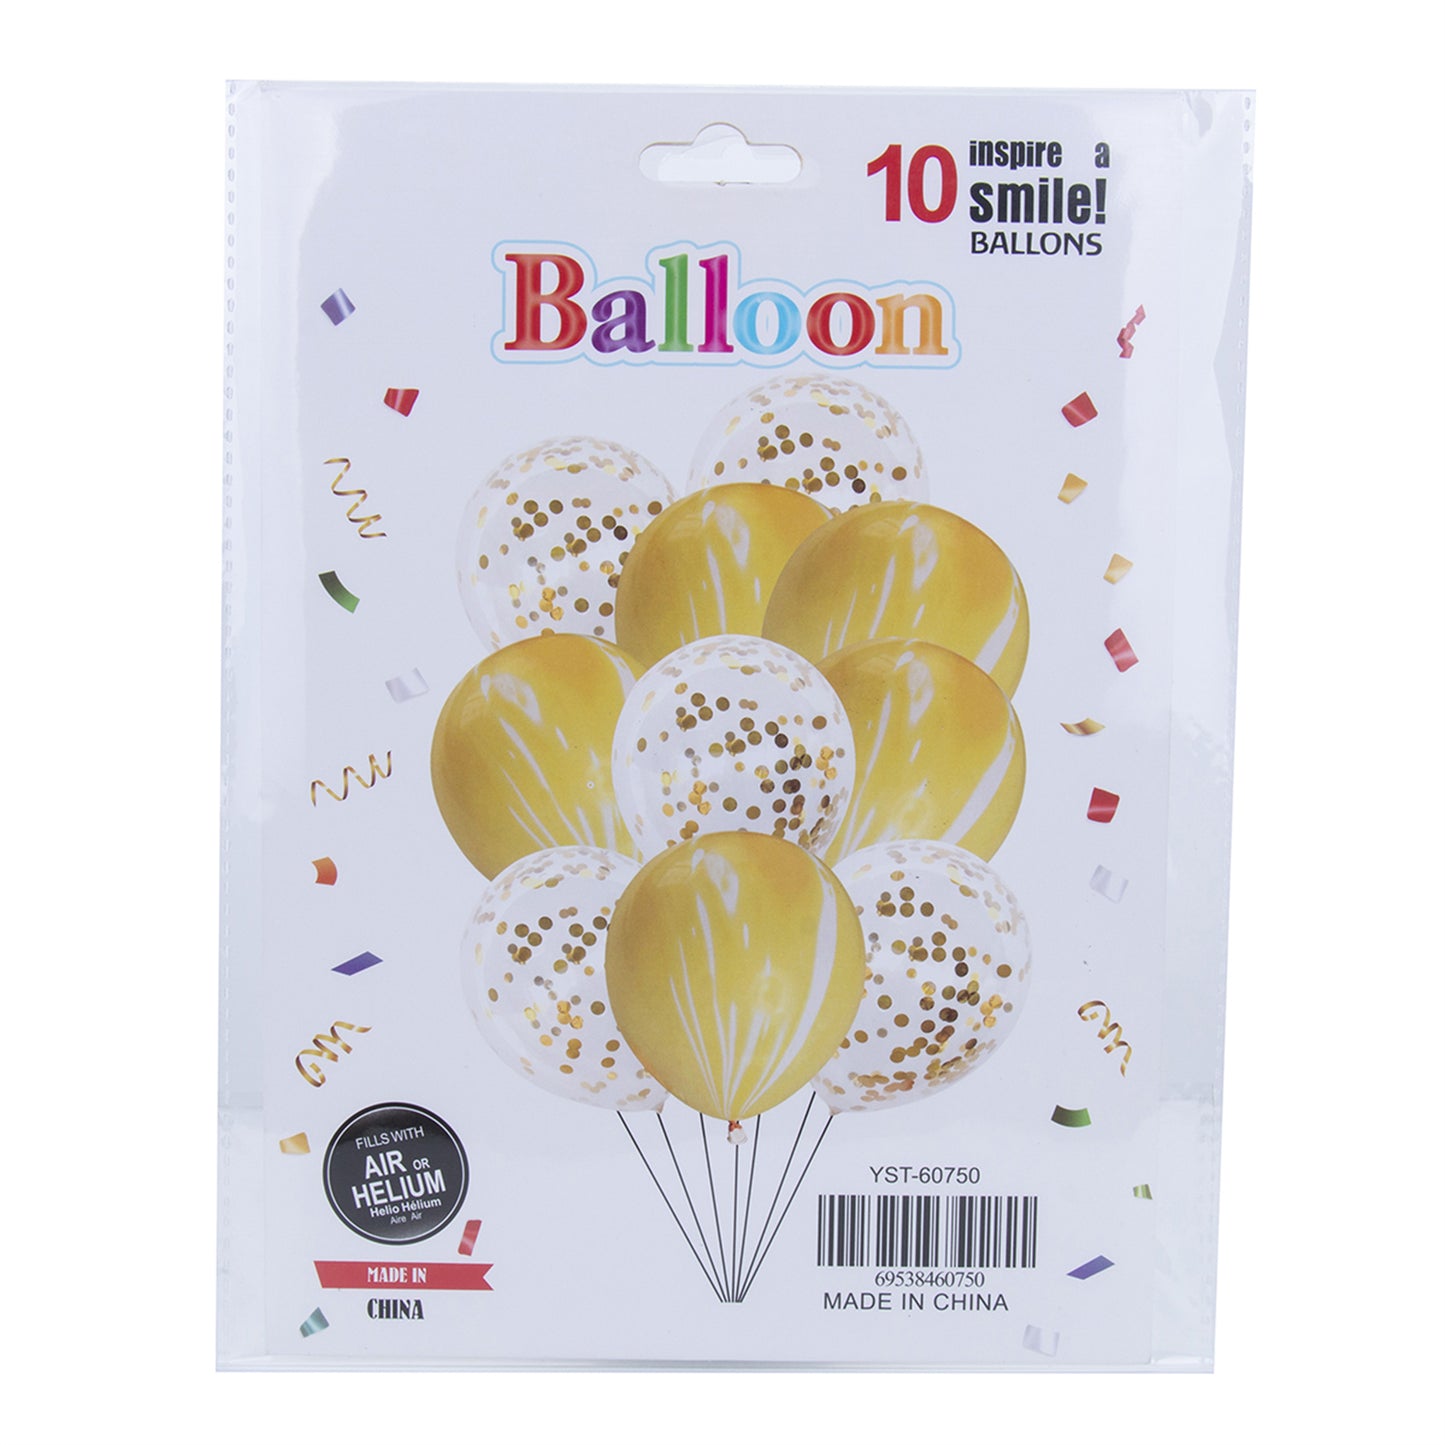 Party balloon themed party